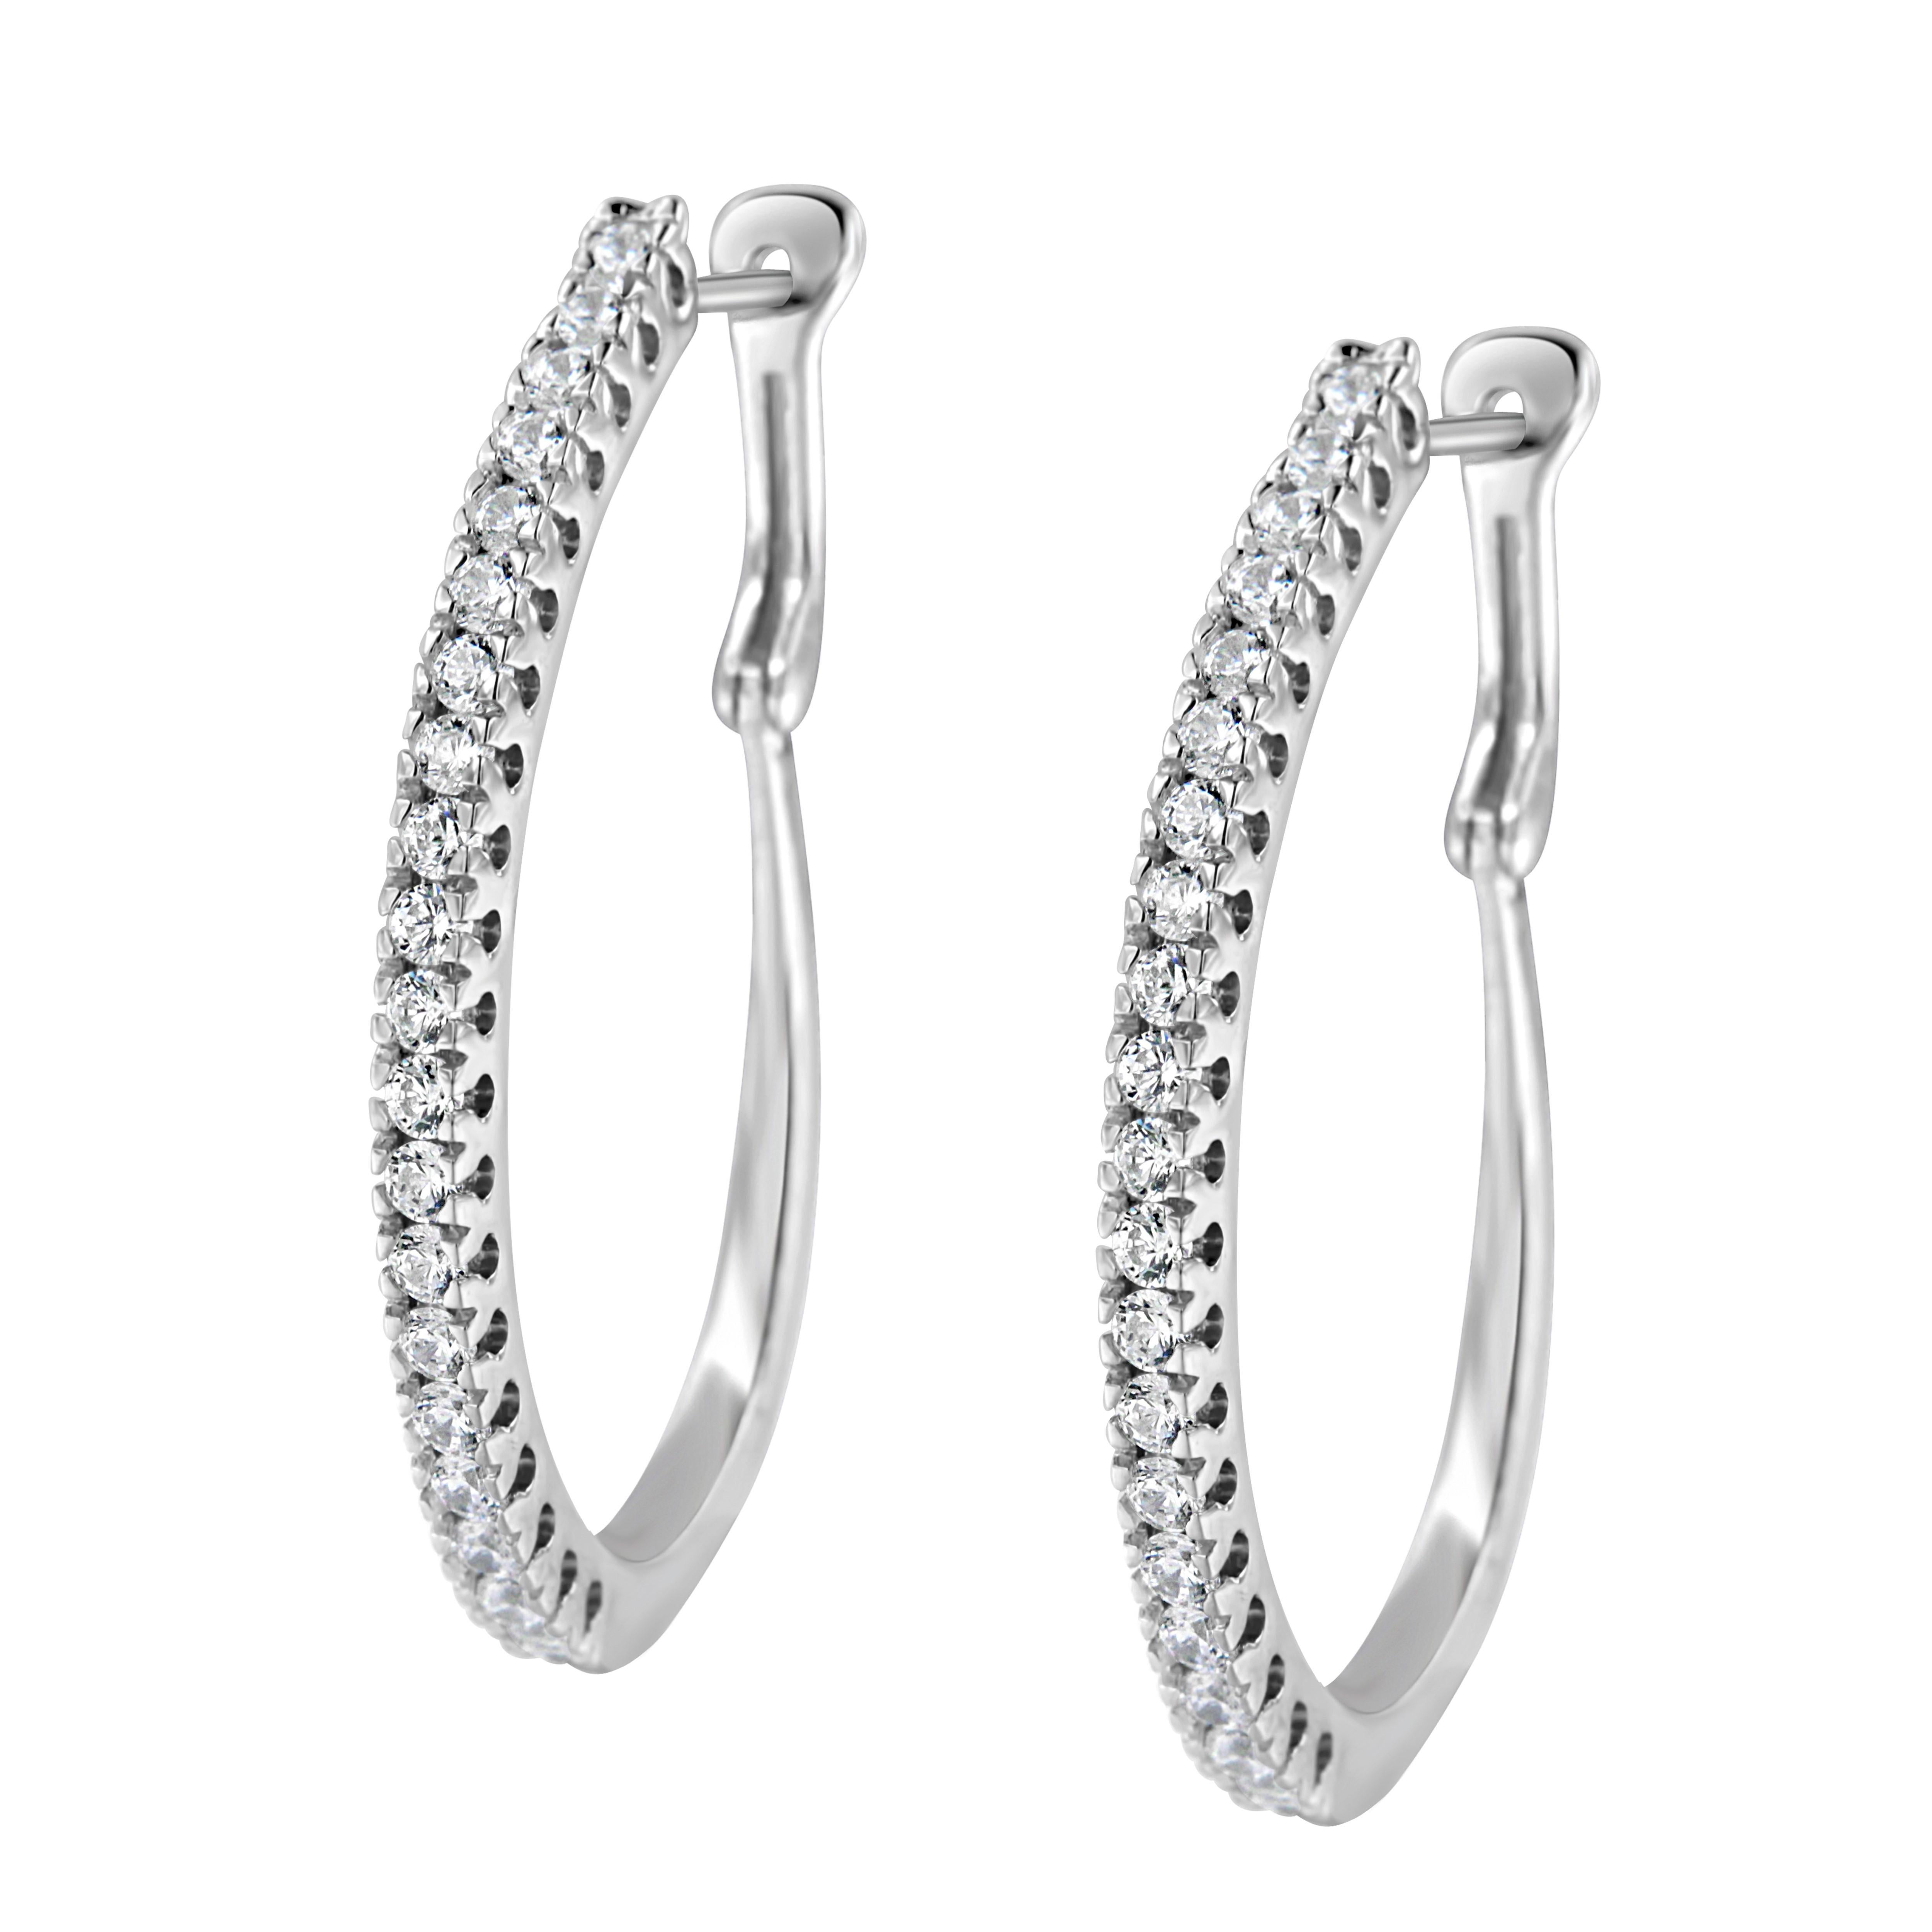 Contemporary 10Kt White Gold 1.0 Carat Diamond Hoop Earrings For Sale